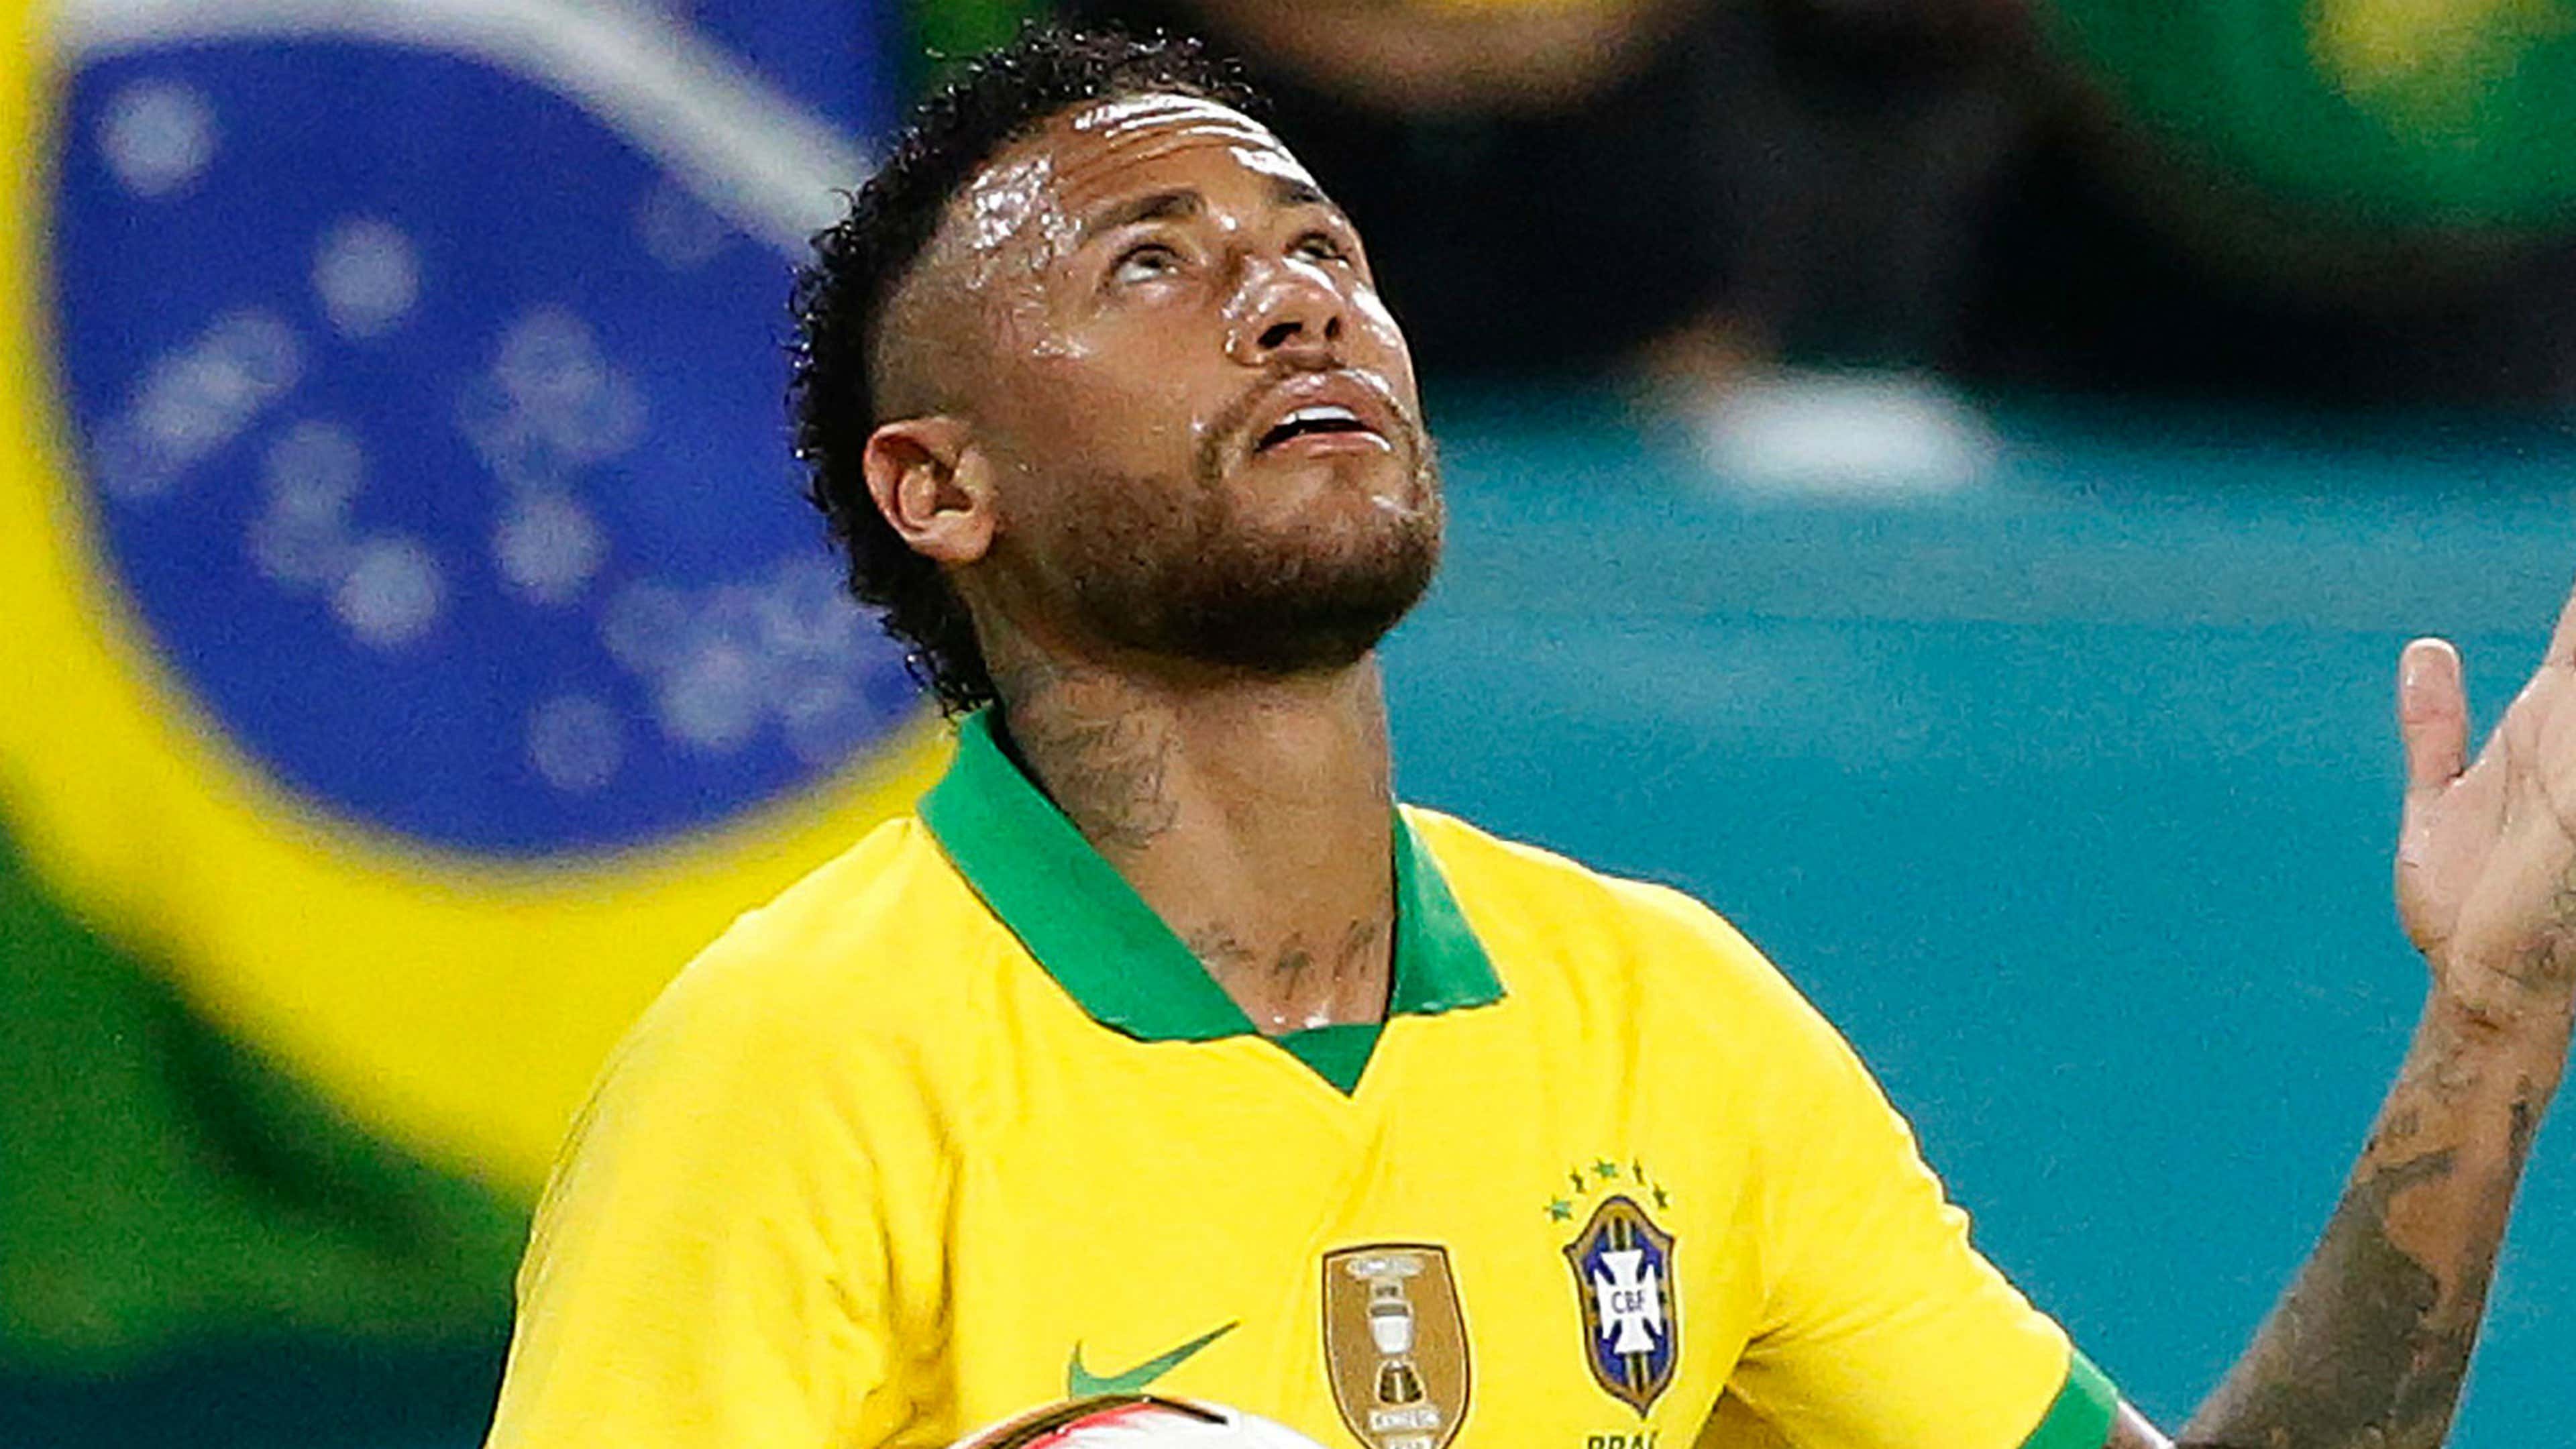 Plan revealed to change three stars on Brazil's World Cup shirt to